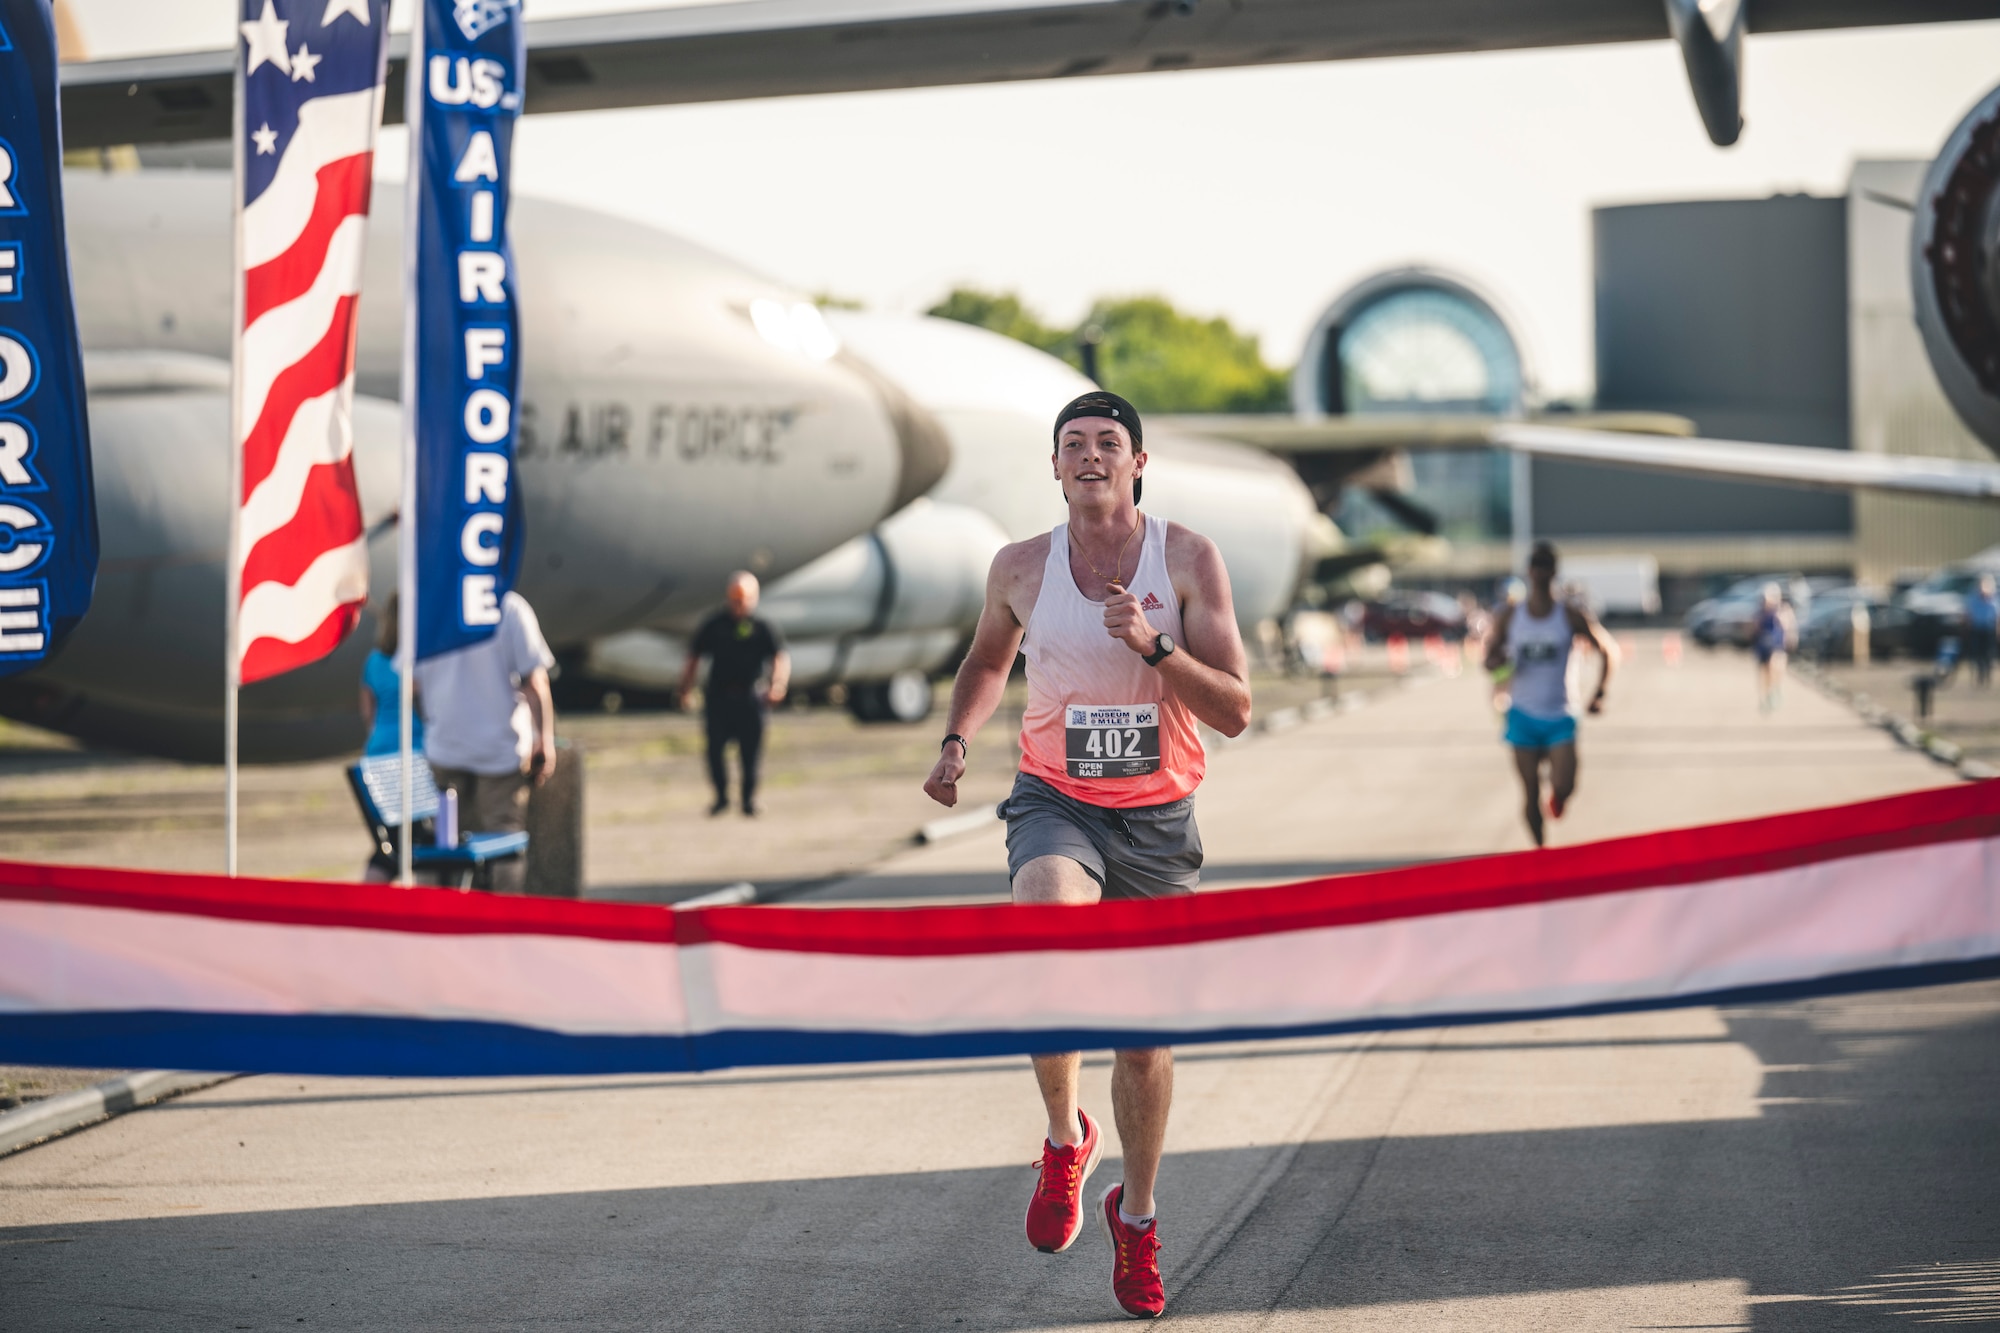 Dylan Whitson finishes first in the Open Race during the inaugural Museum Mile event hosted by the Air Force Marathon Office May 11 at the National Museum of the U.S. Air Force, Dayton, Ohio.